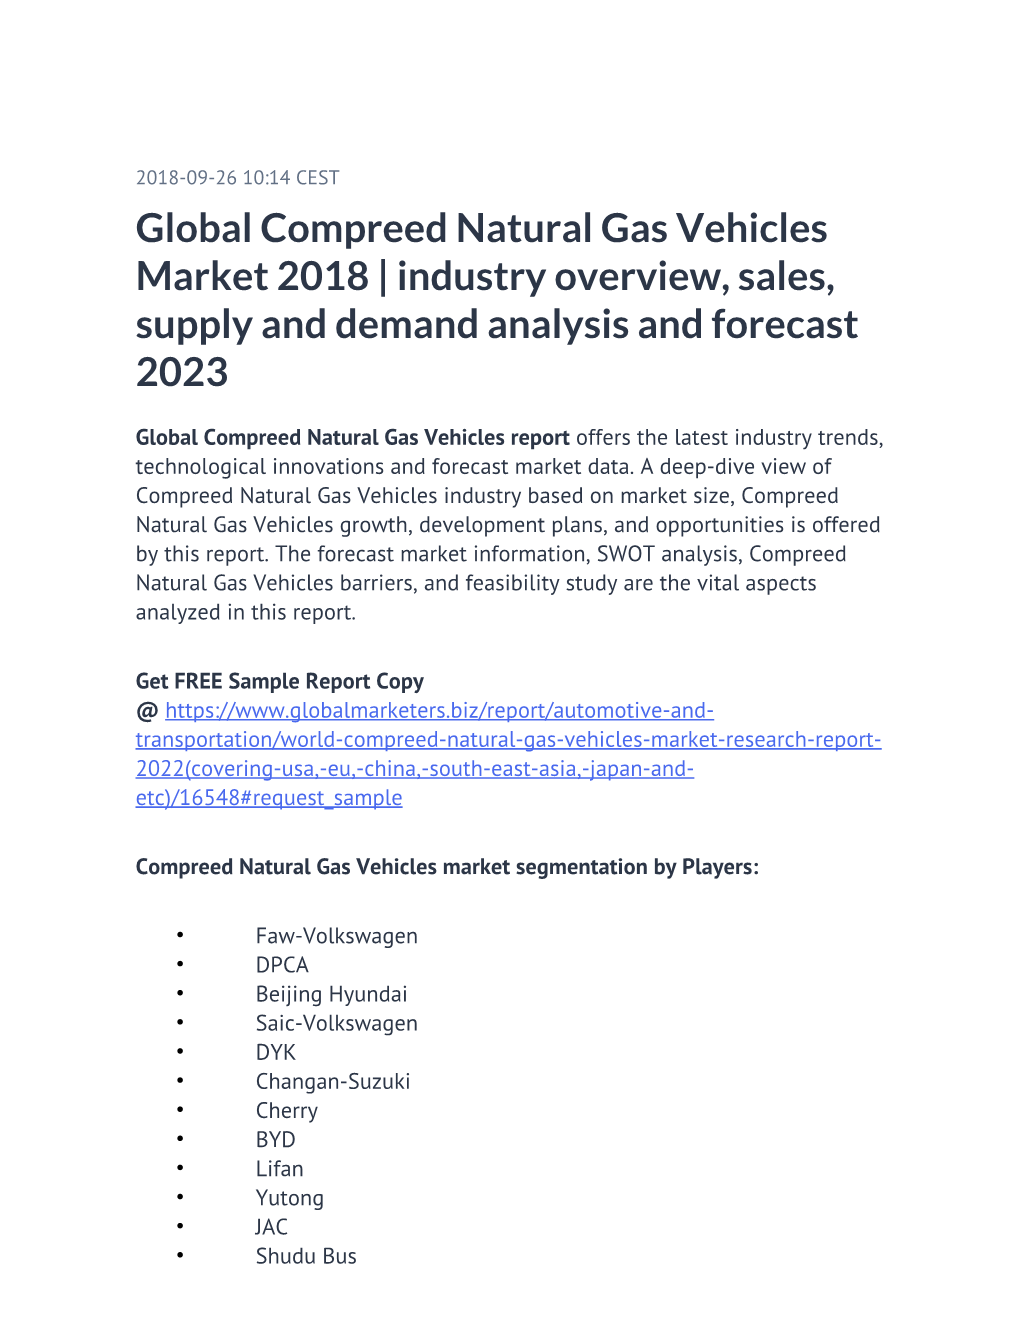 Global Compreed Natural Gas Vehicles Market 2018 | Industry Overview, Sales, Supply and Demand Analysis and Forecast 2023